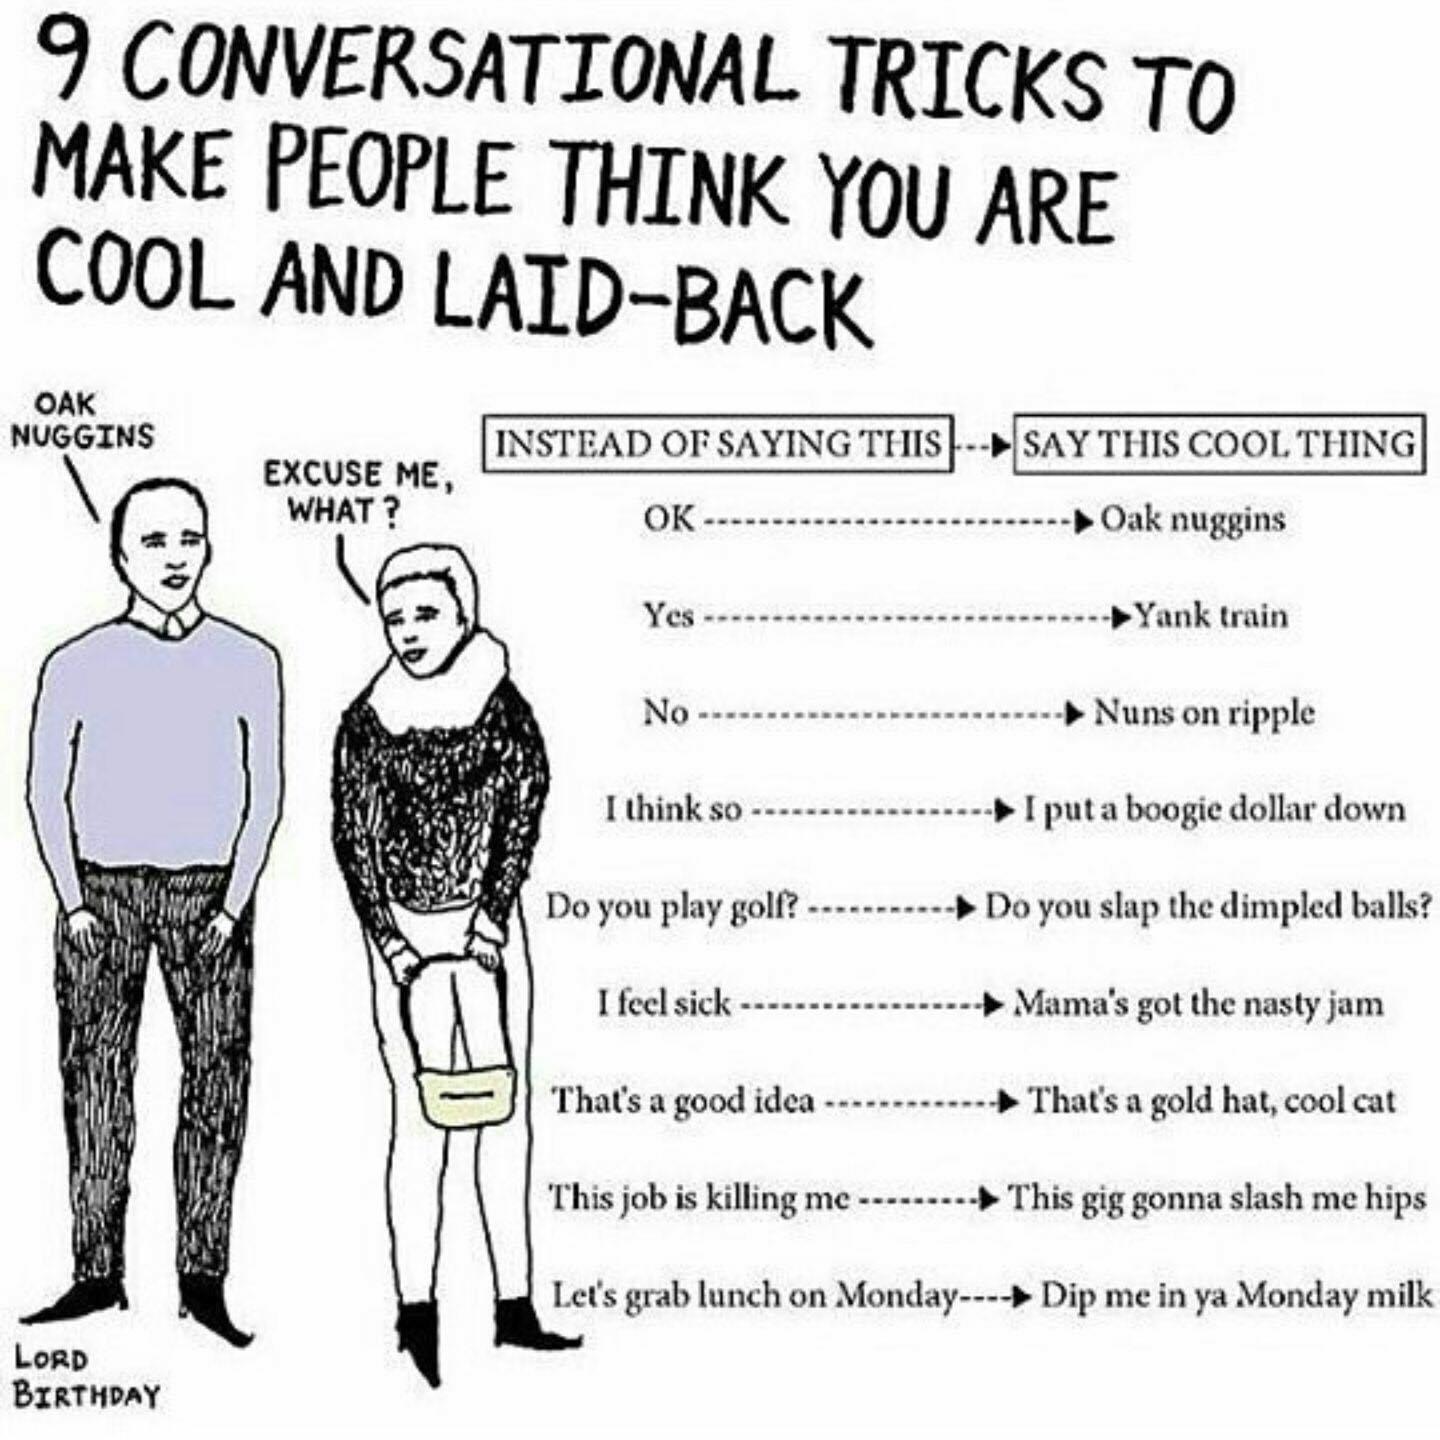 oak nuggins - 9 Conversational Tricks To Make People Think You Are Cool And LaidBack Oak Nuggins Instead Of Saying This Say This Cool Thing Excuse Me, What? . Oak nuggins Yes Yank train No Nuns on ripple I think so I put a boogie dollar down Do you play g